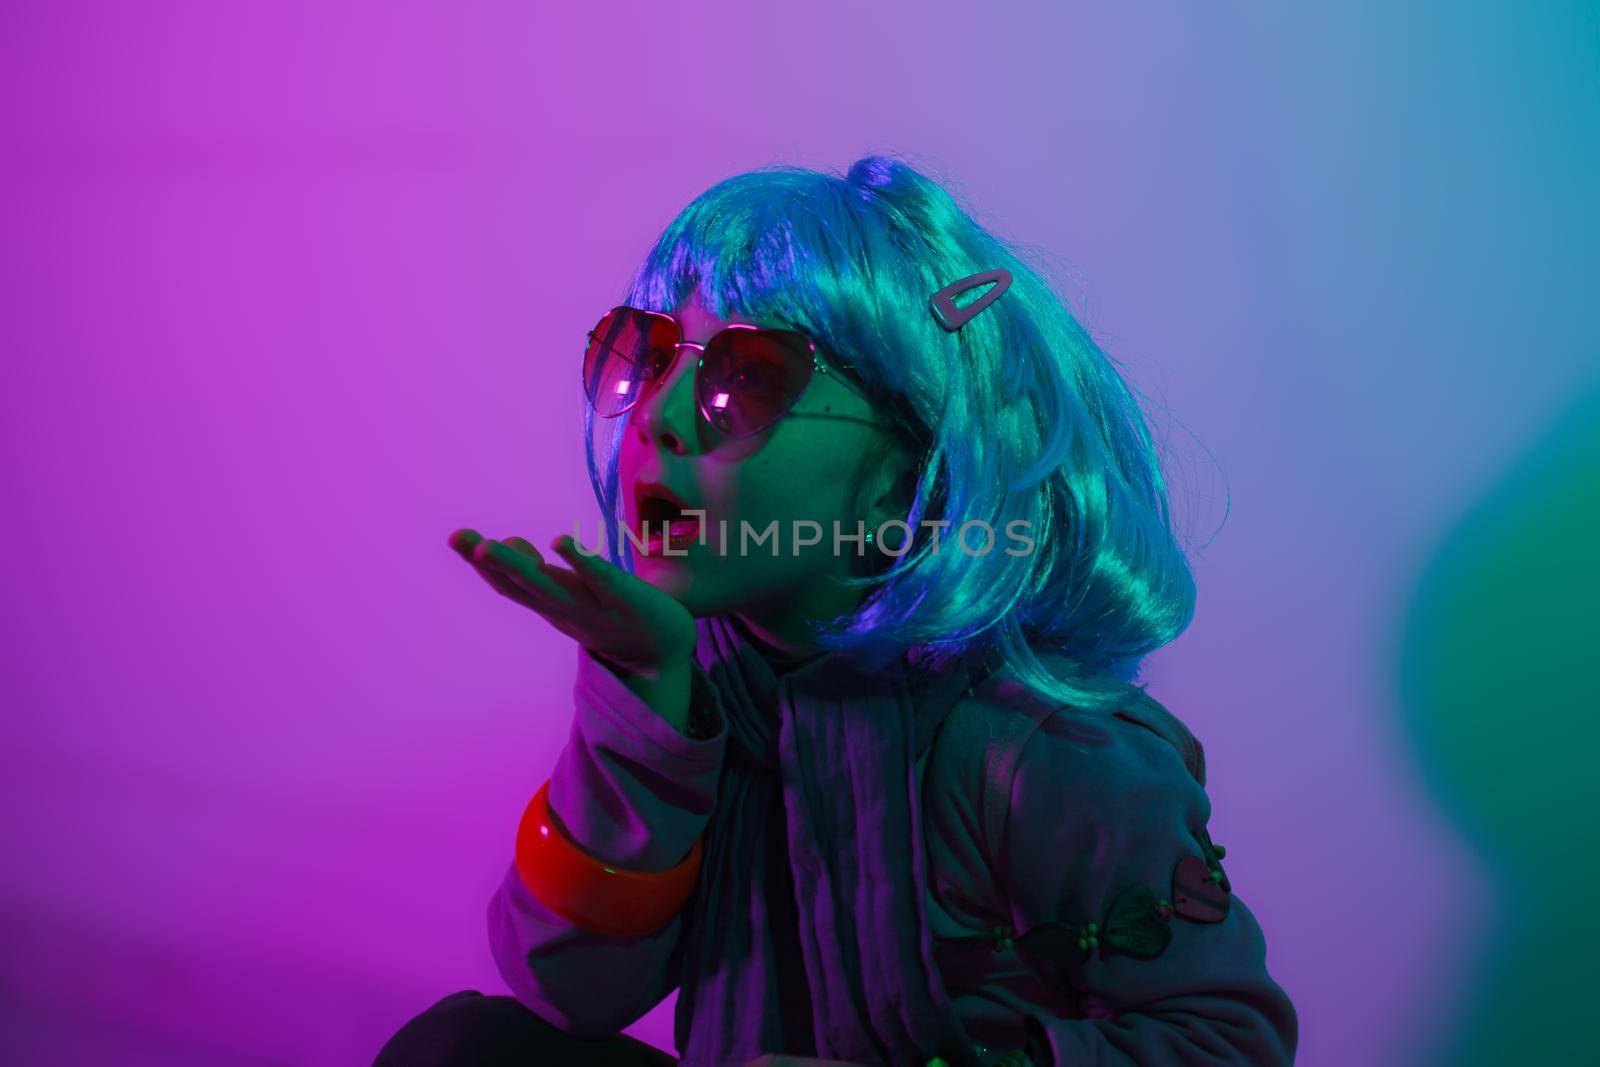 A glamour little girl posing for a photo portrait while wearing a colorful wig by bepsimage